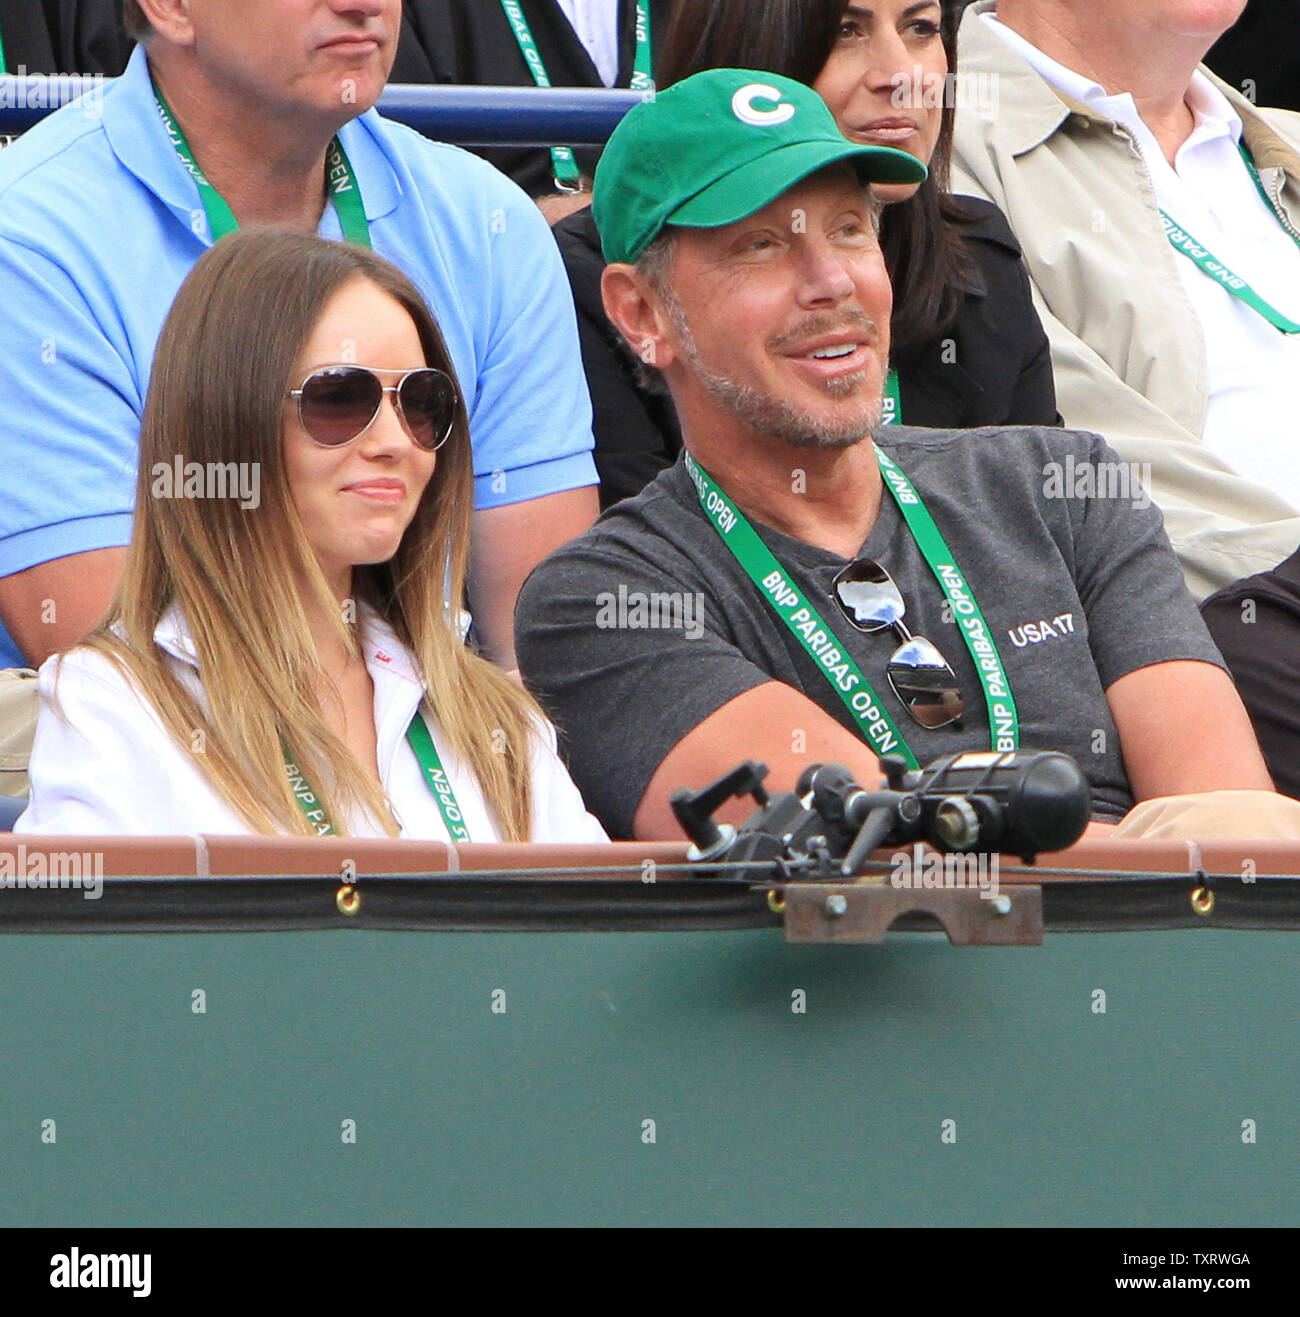 Oracle CEO and tournament owner Larry Ellison and guest watch the mens semifinal match between American John Isner and Serbian Novak Djokovic at the BNP Paribas Open in Indian Wells, California on